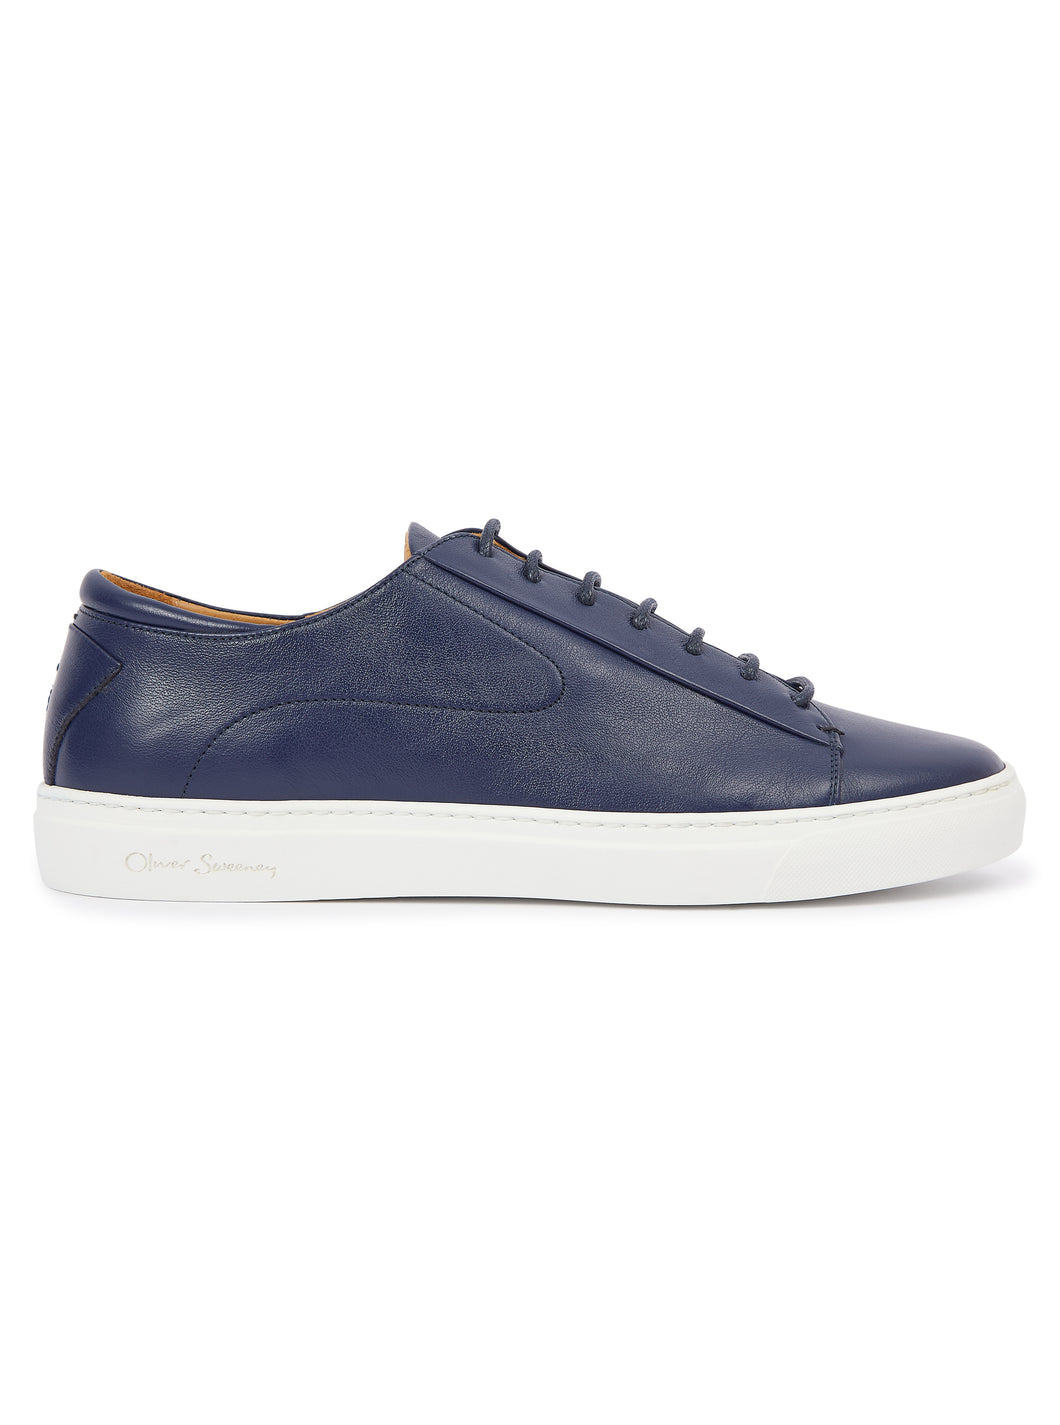 Oliver Sweeney Sirolo Trainer Navy